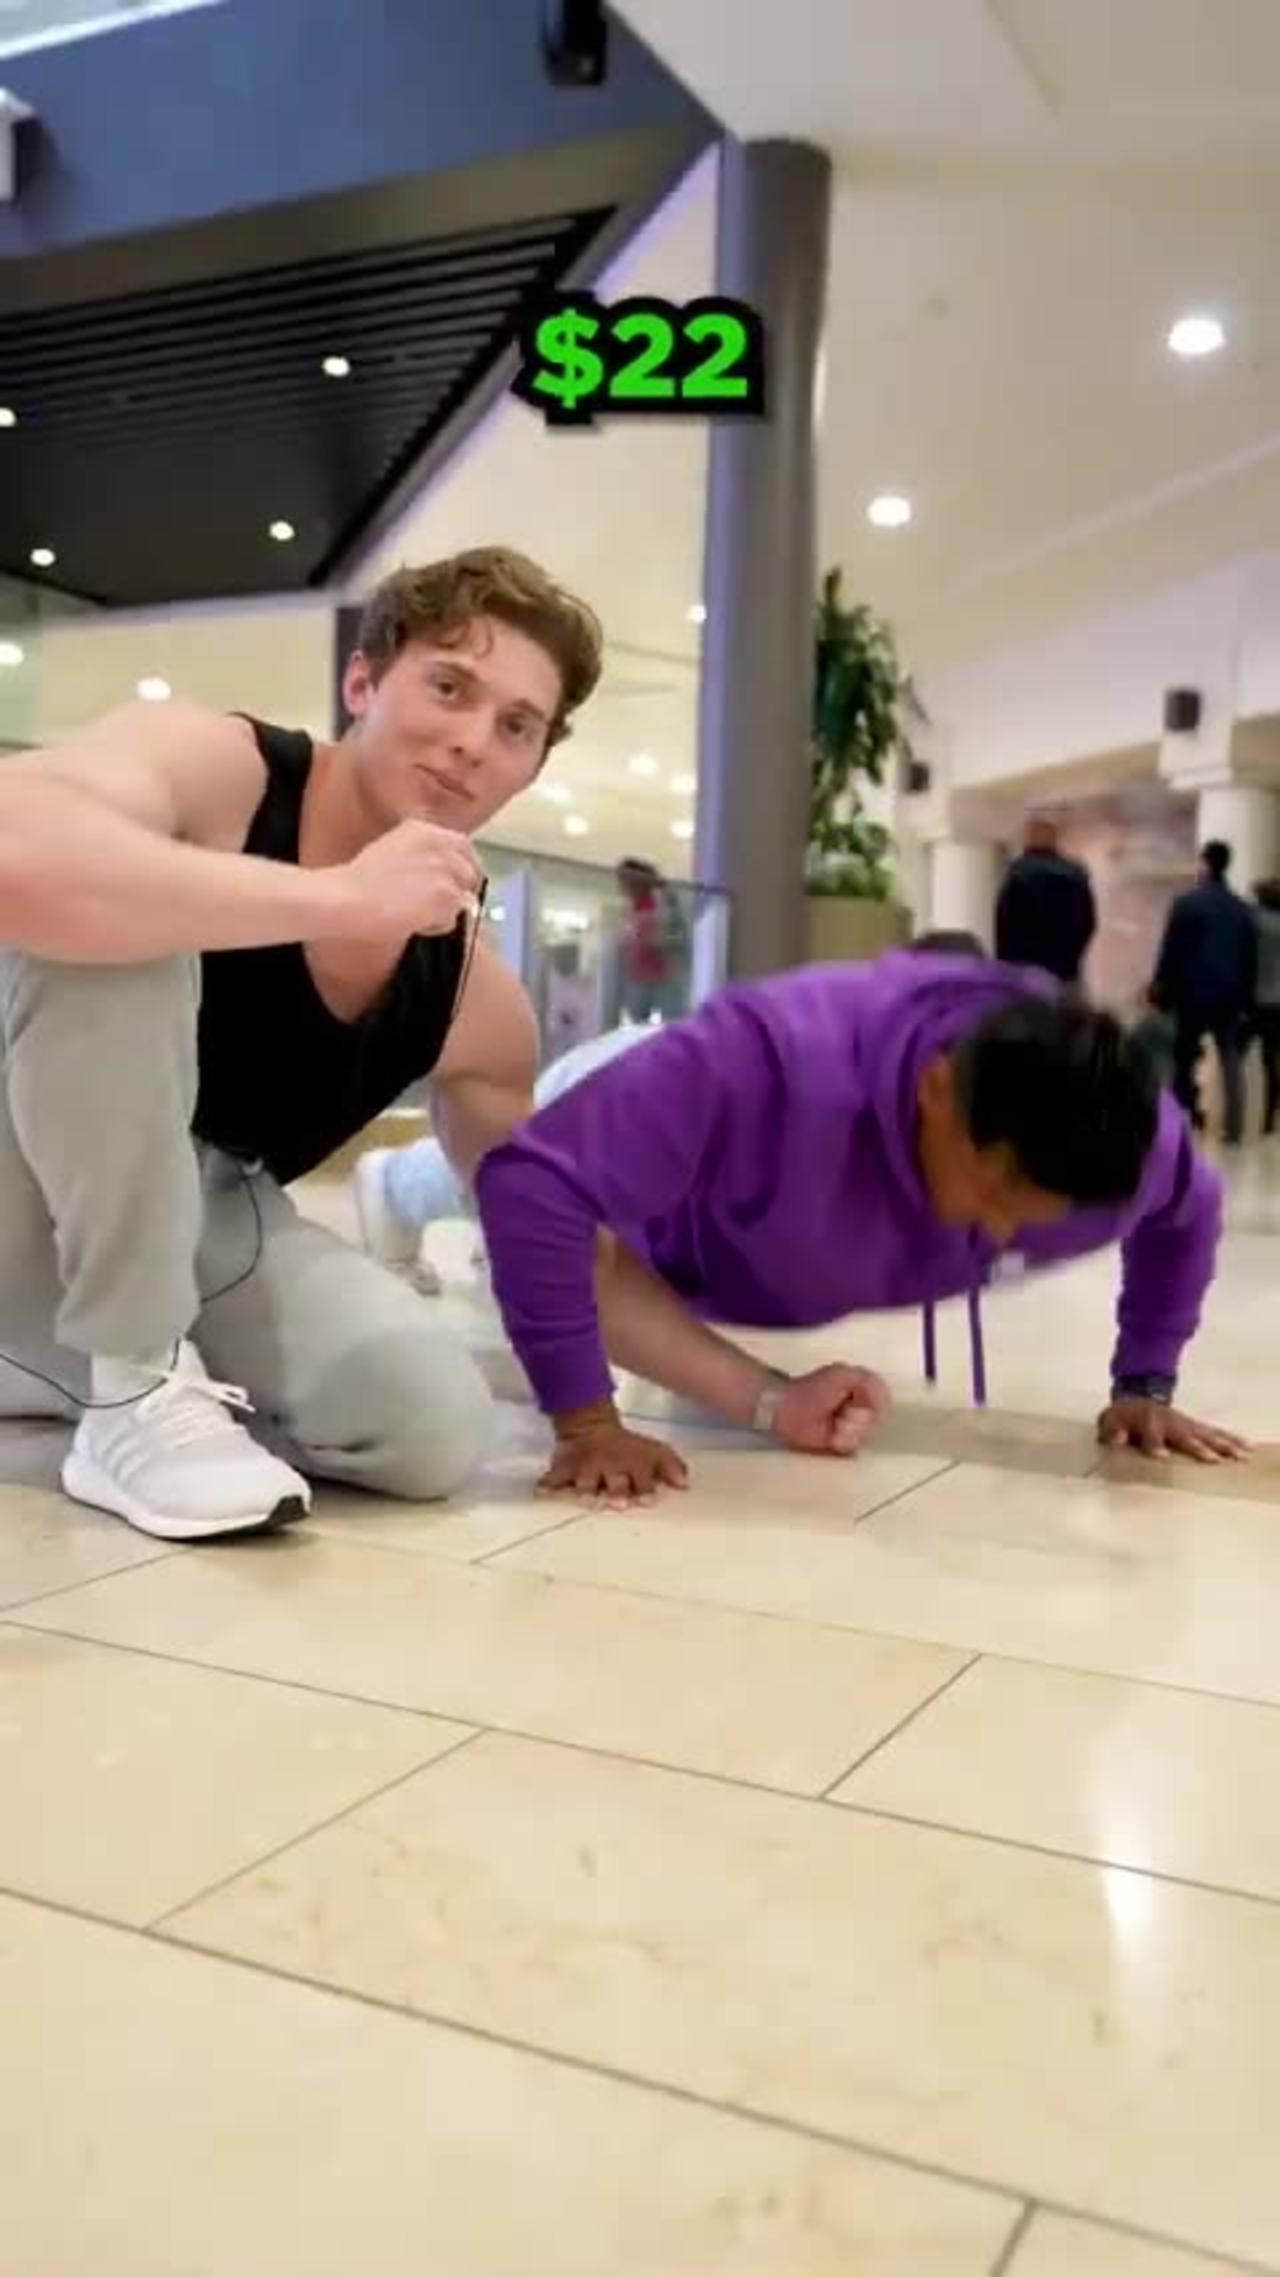 Every pushup this man does  equals to  1$